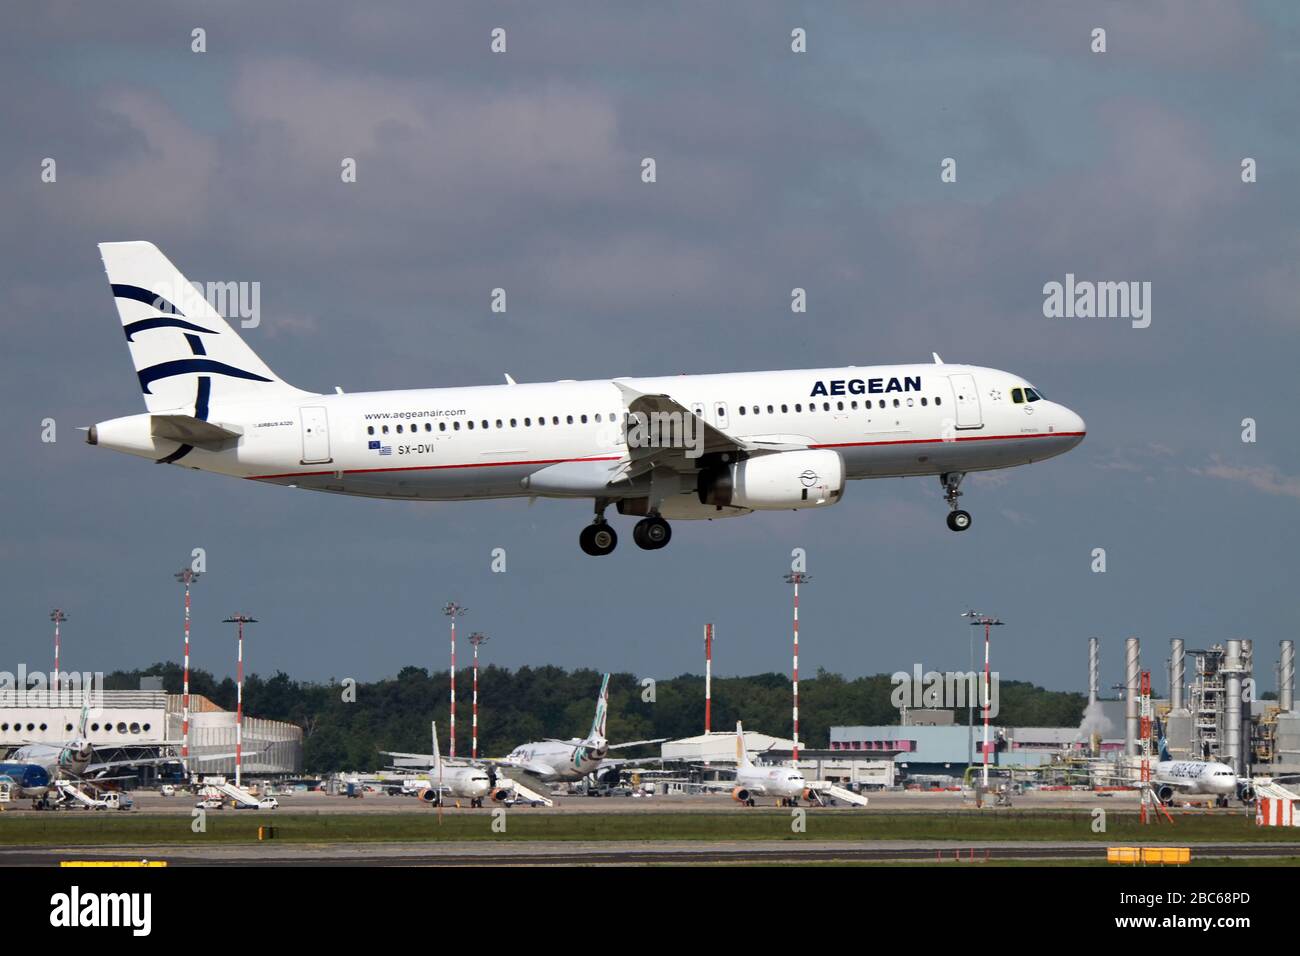 SX-DVI Aegean Airlines, Airbus A320 Photographed at Malpensa airport, Milan, Italy Stock Photo